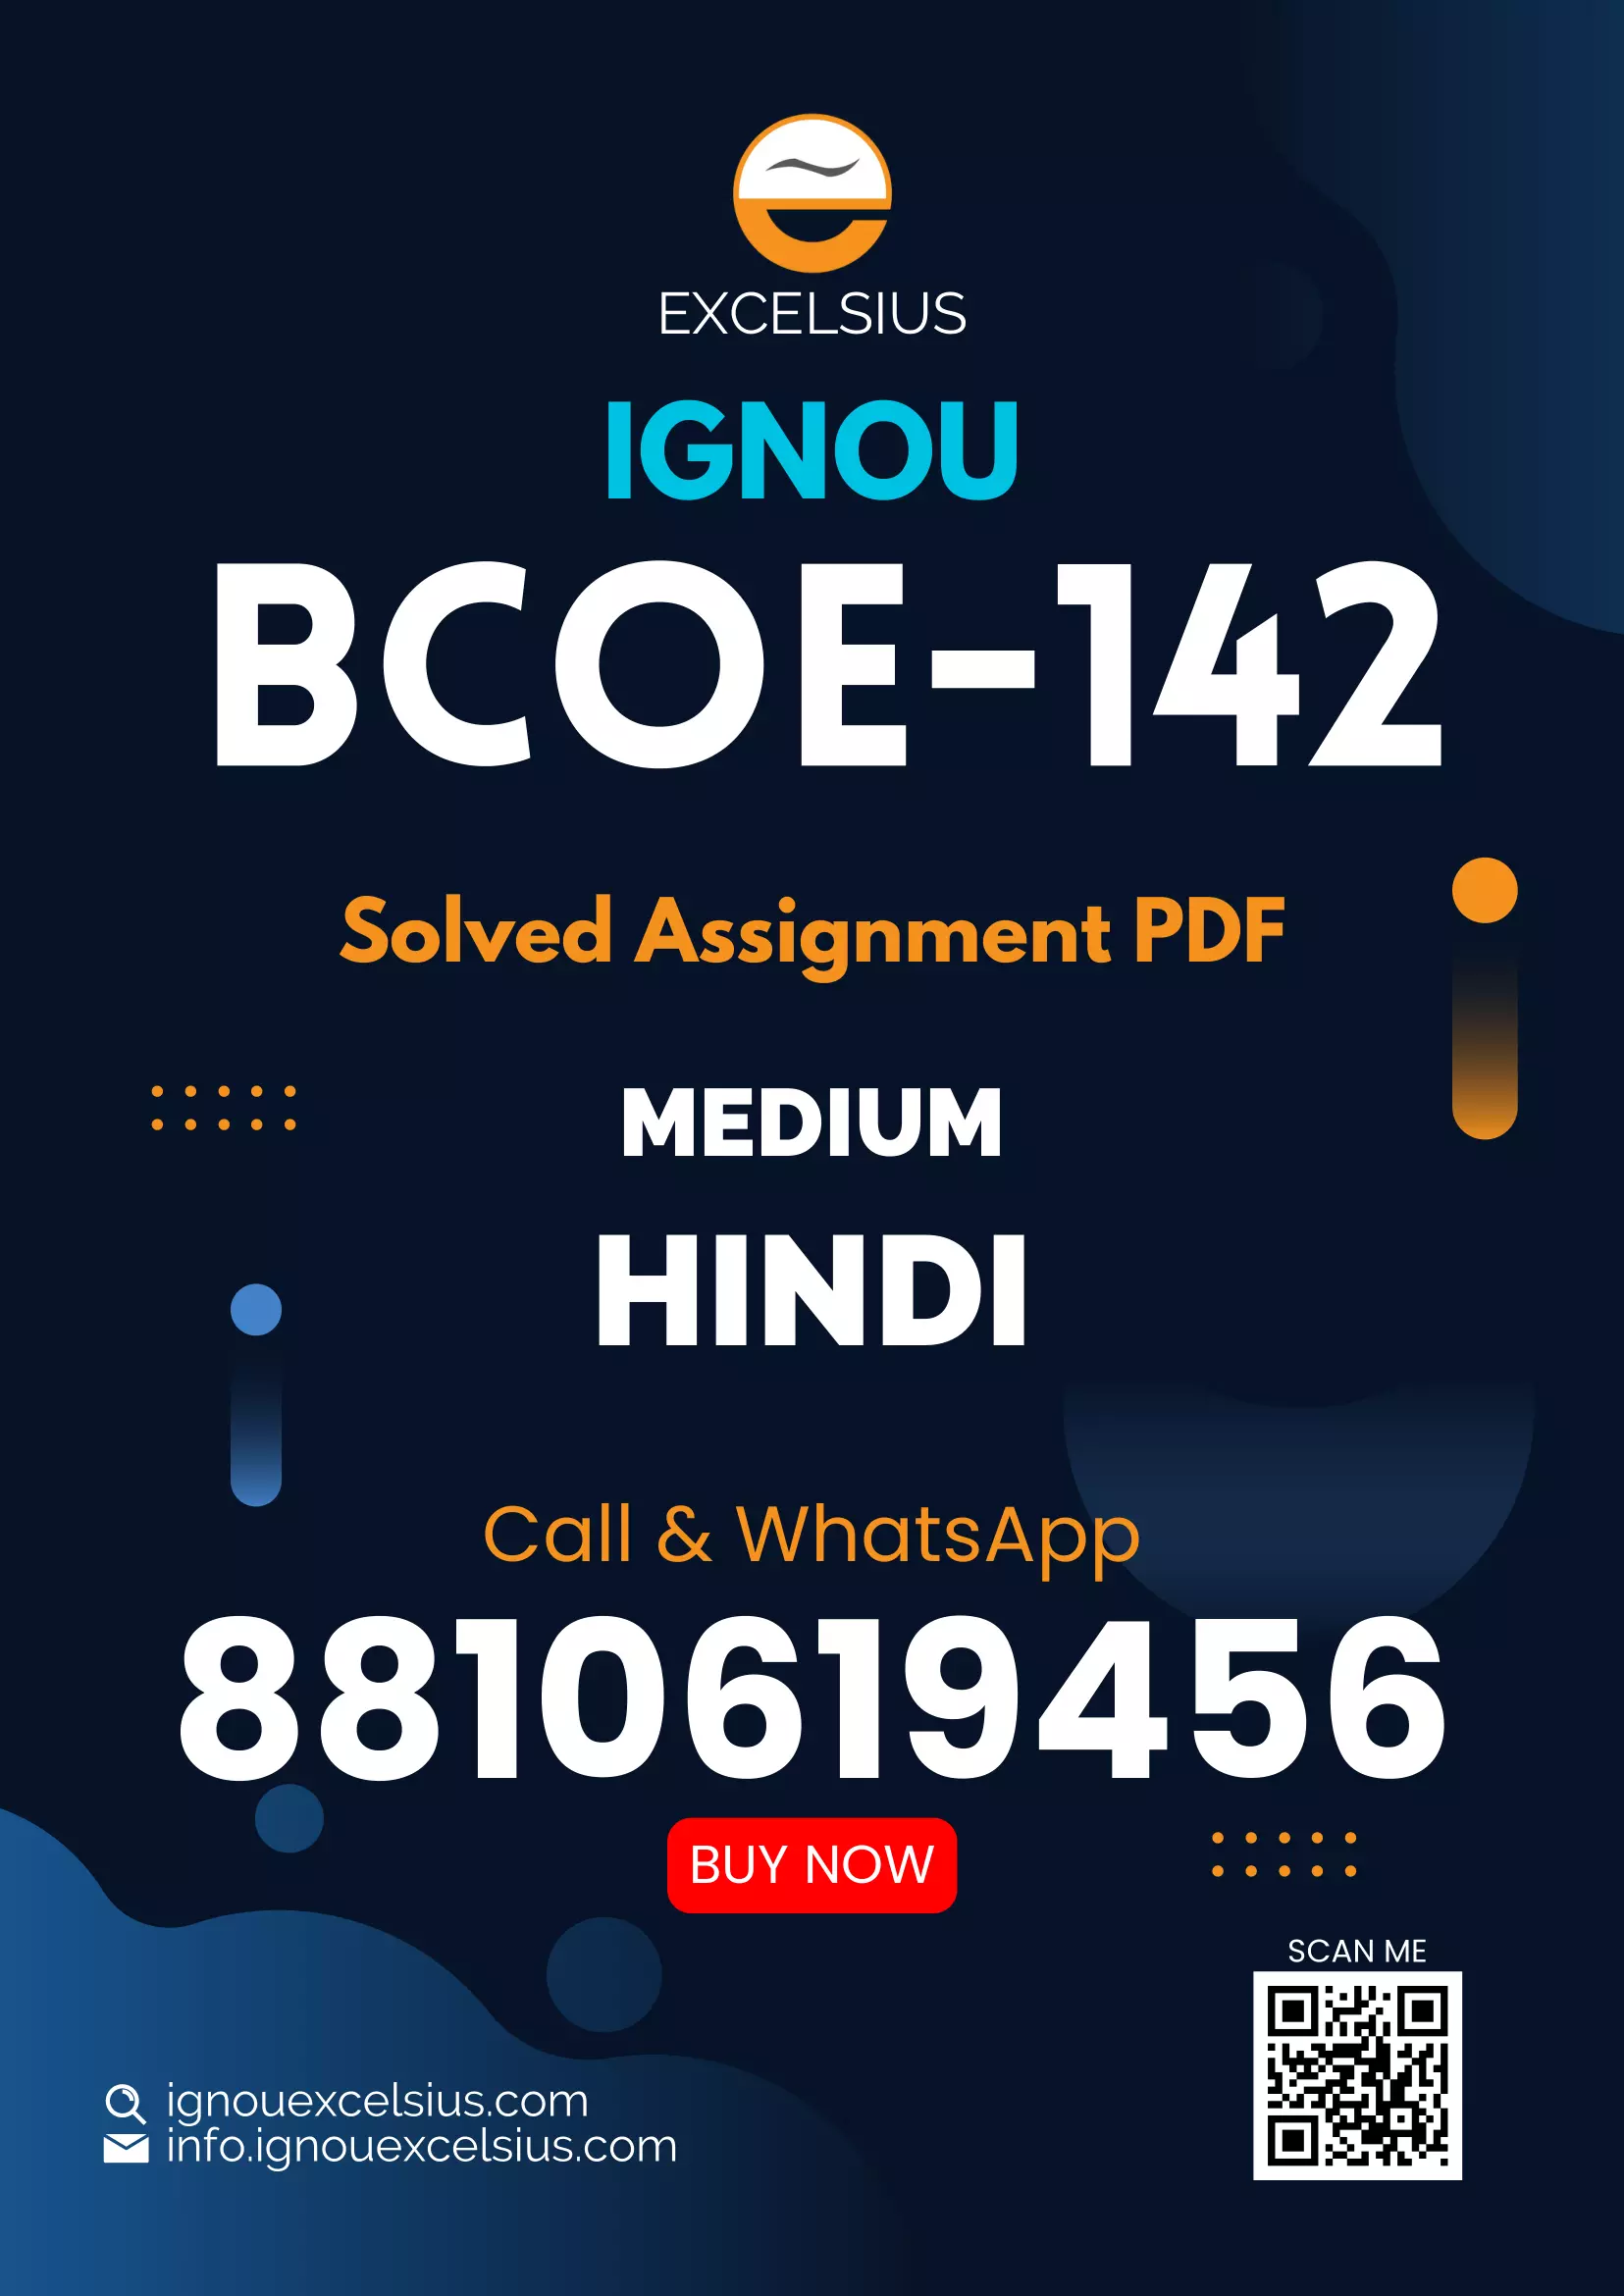 IGNOU BCOE-142 - Fundamentals of Financial Management, Latest Solved Assignment-January 2023 - December 2023